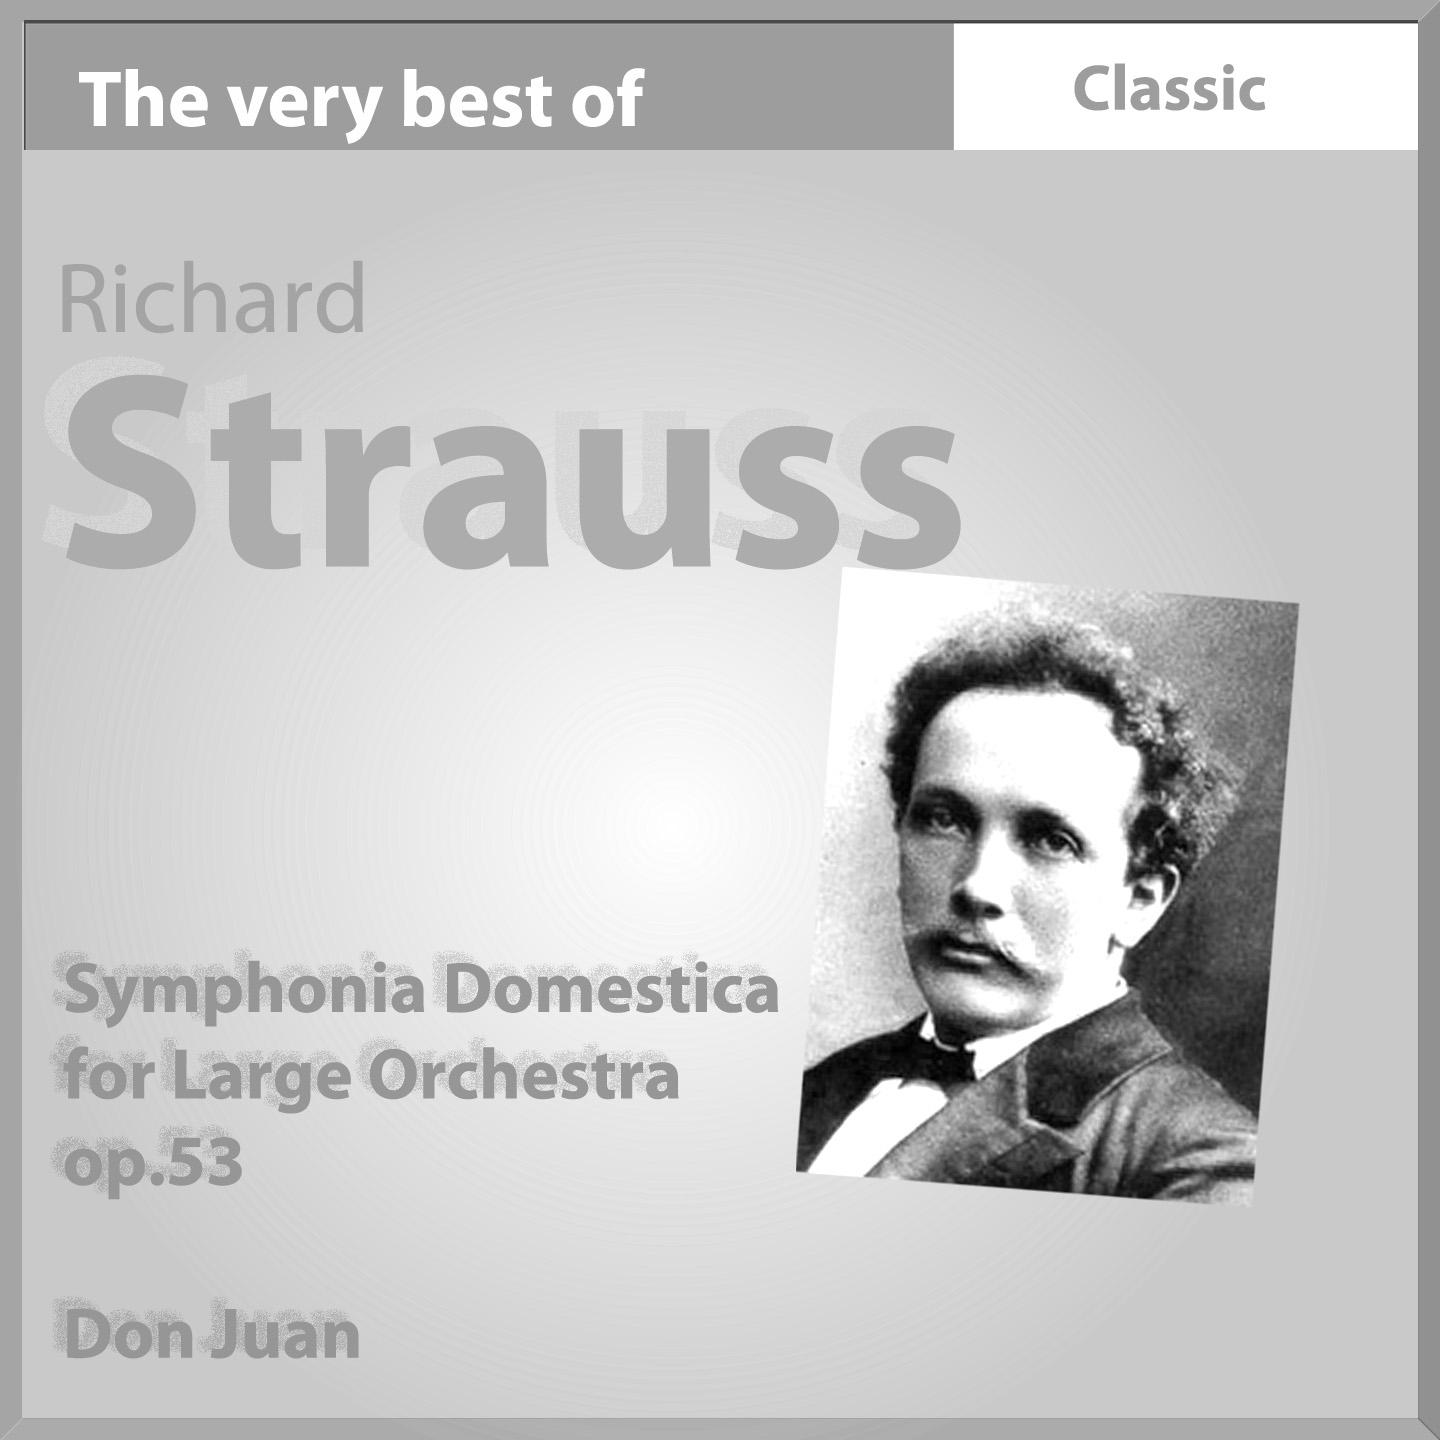 The Very Best of Richard Strauss: Symphonia domestica for Large Orchestra, Op. 53